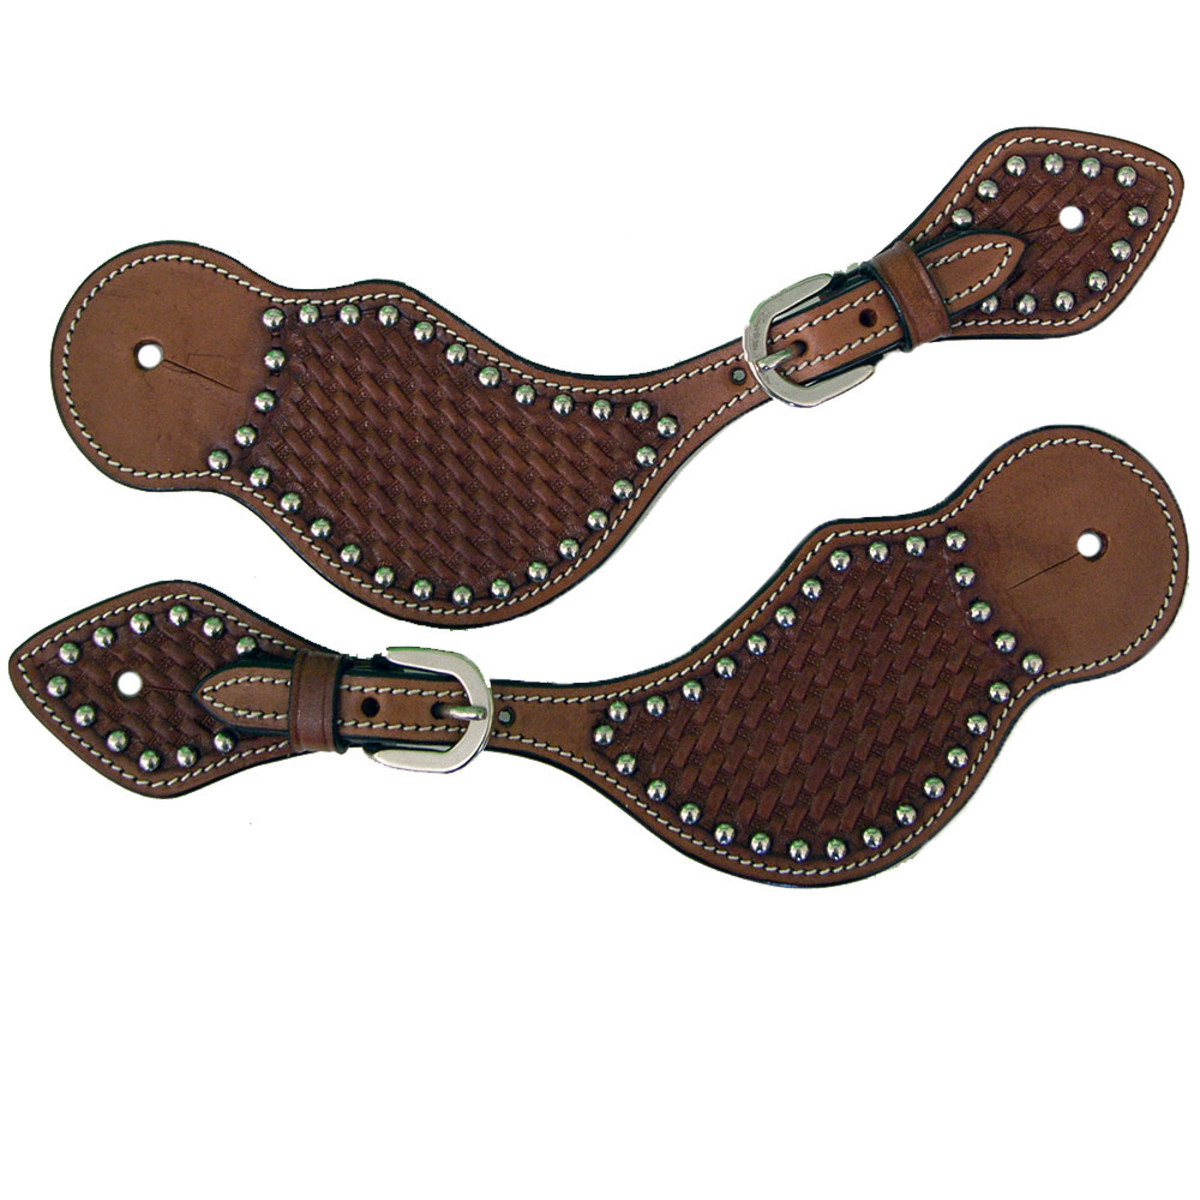 Shaped Leather Basketweave Tooled Western Spur Straps Silver Studs Basket Weave Western Spur Straps Silver Dots Chestnut